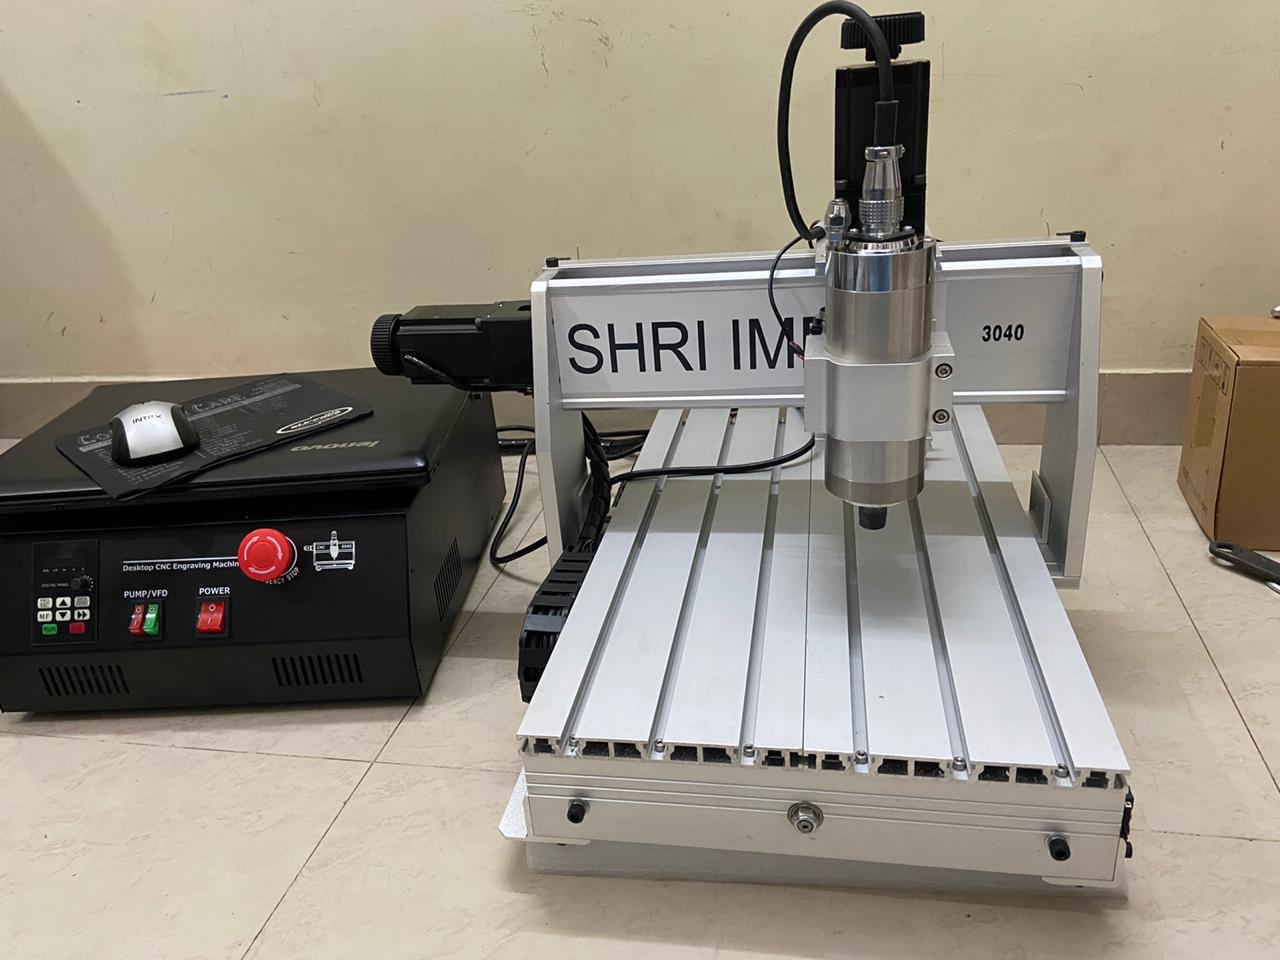 cnc 6040 linear guide 5axis 1500w